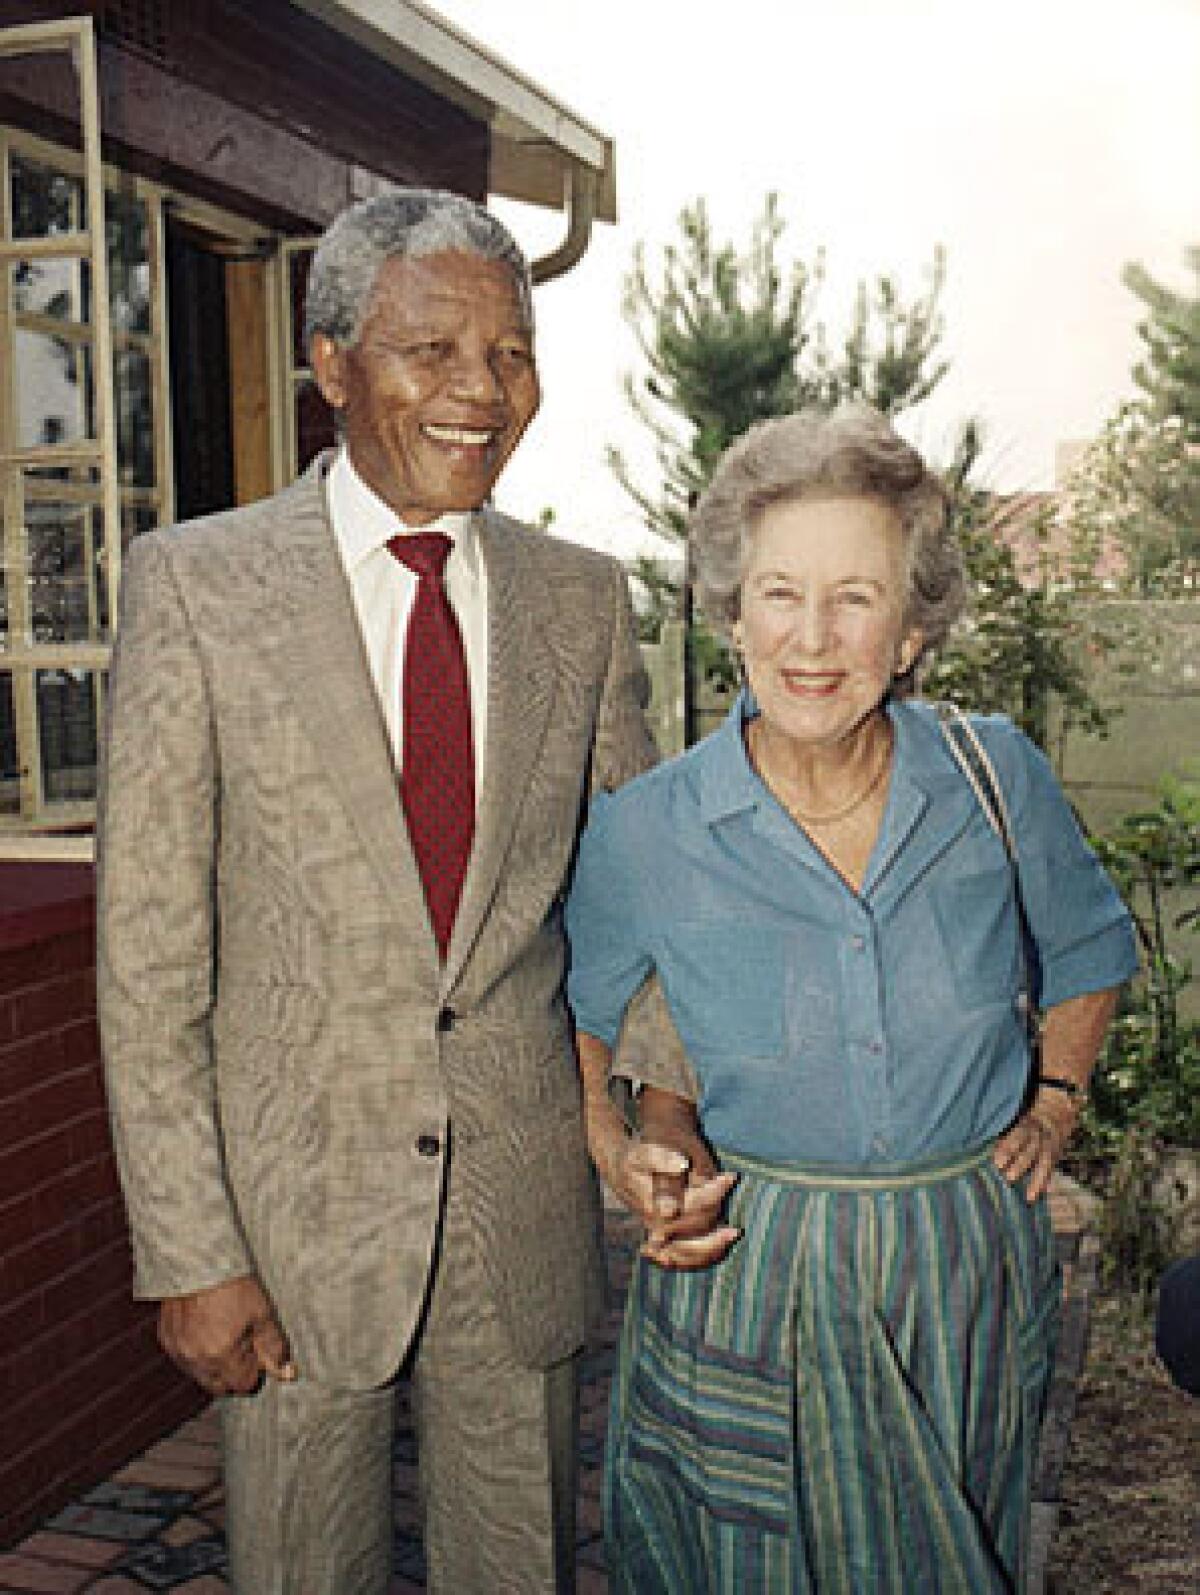 Suzman visits Nelson Mandela at his Soweto home after his release from prison in 1990. She had visited him in 1967 at Robben Island during his imprisonment.